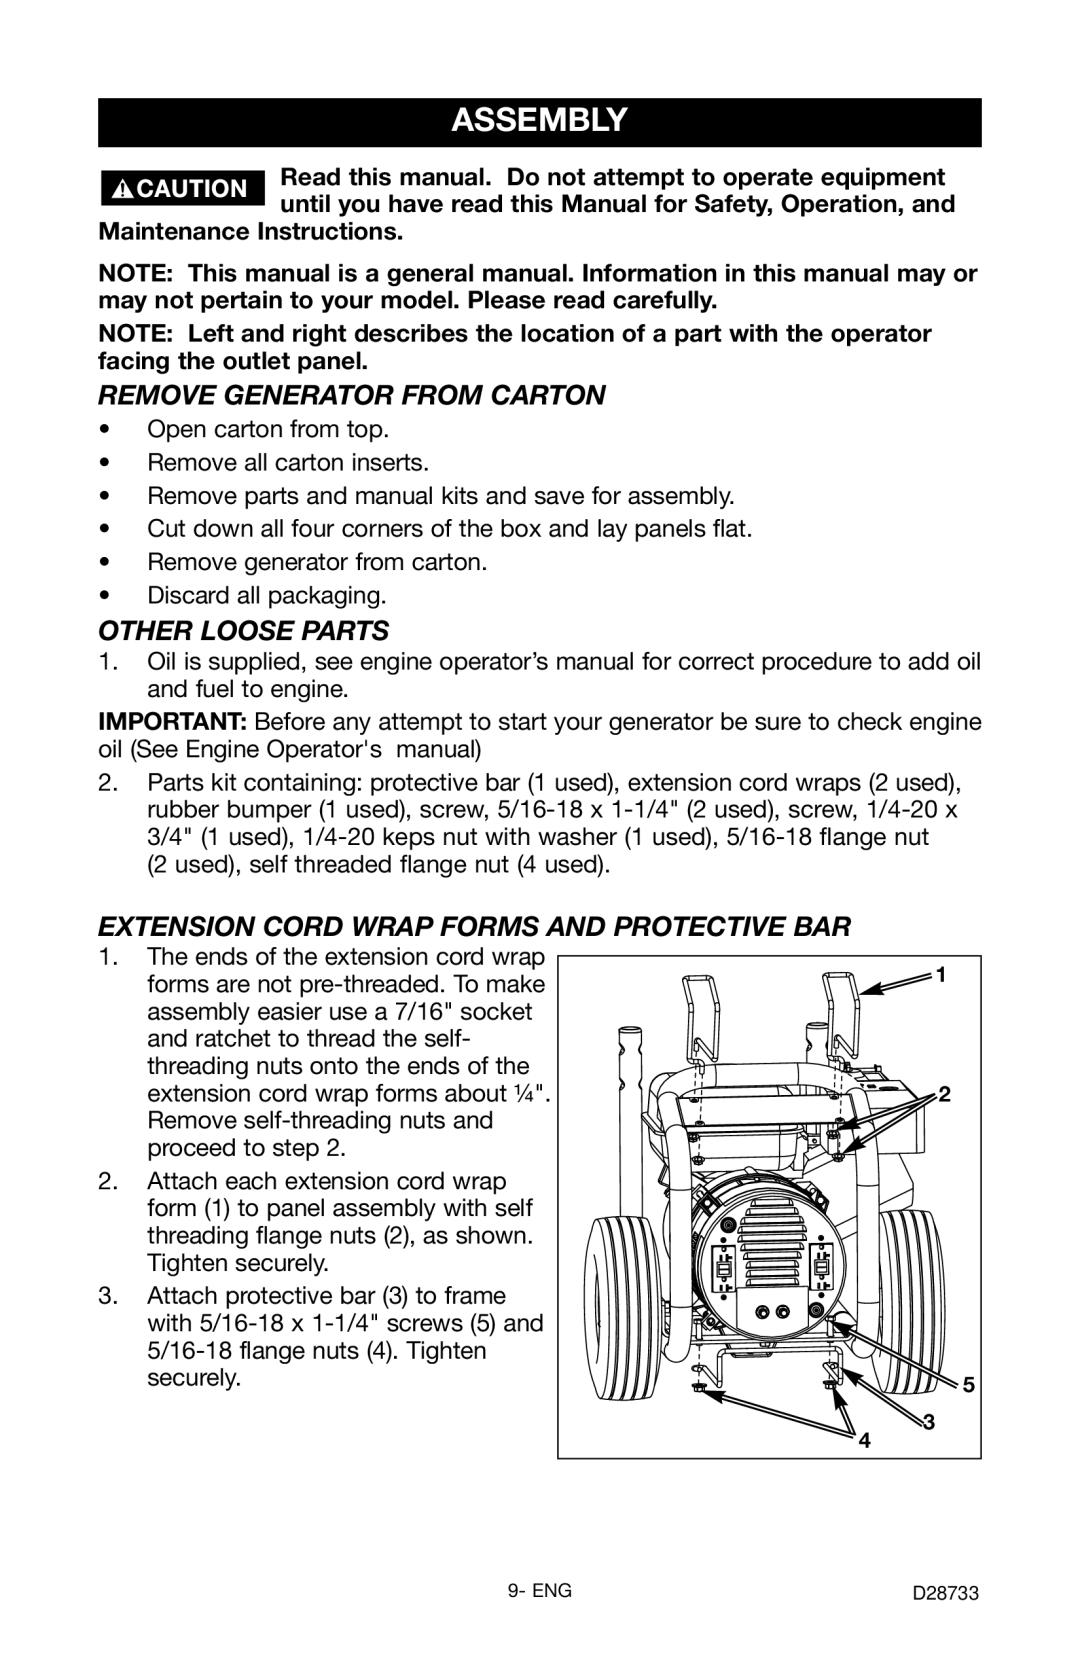 Porter-Cable D28733-034-0, PGN350 instruction manual Assembly, Remove Generator From Carton, Other Loose Parts 